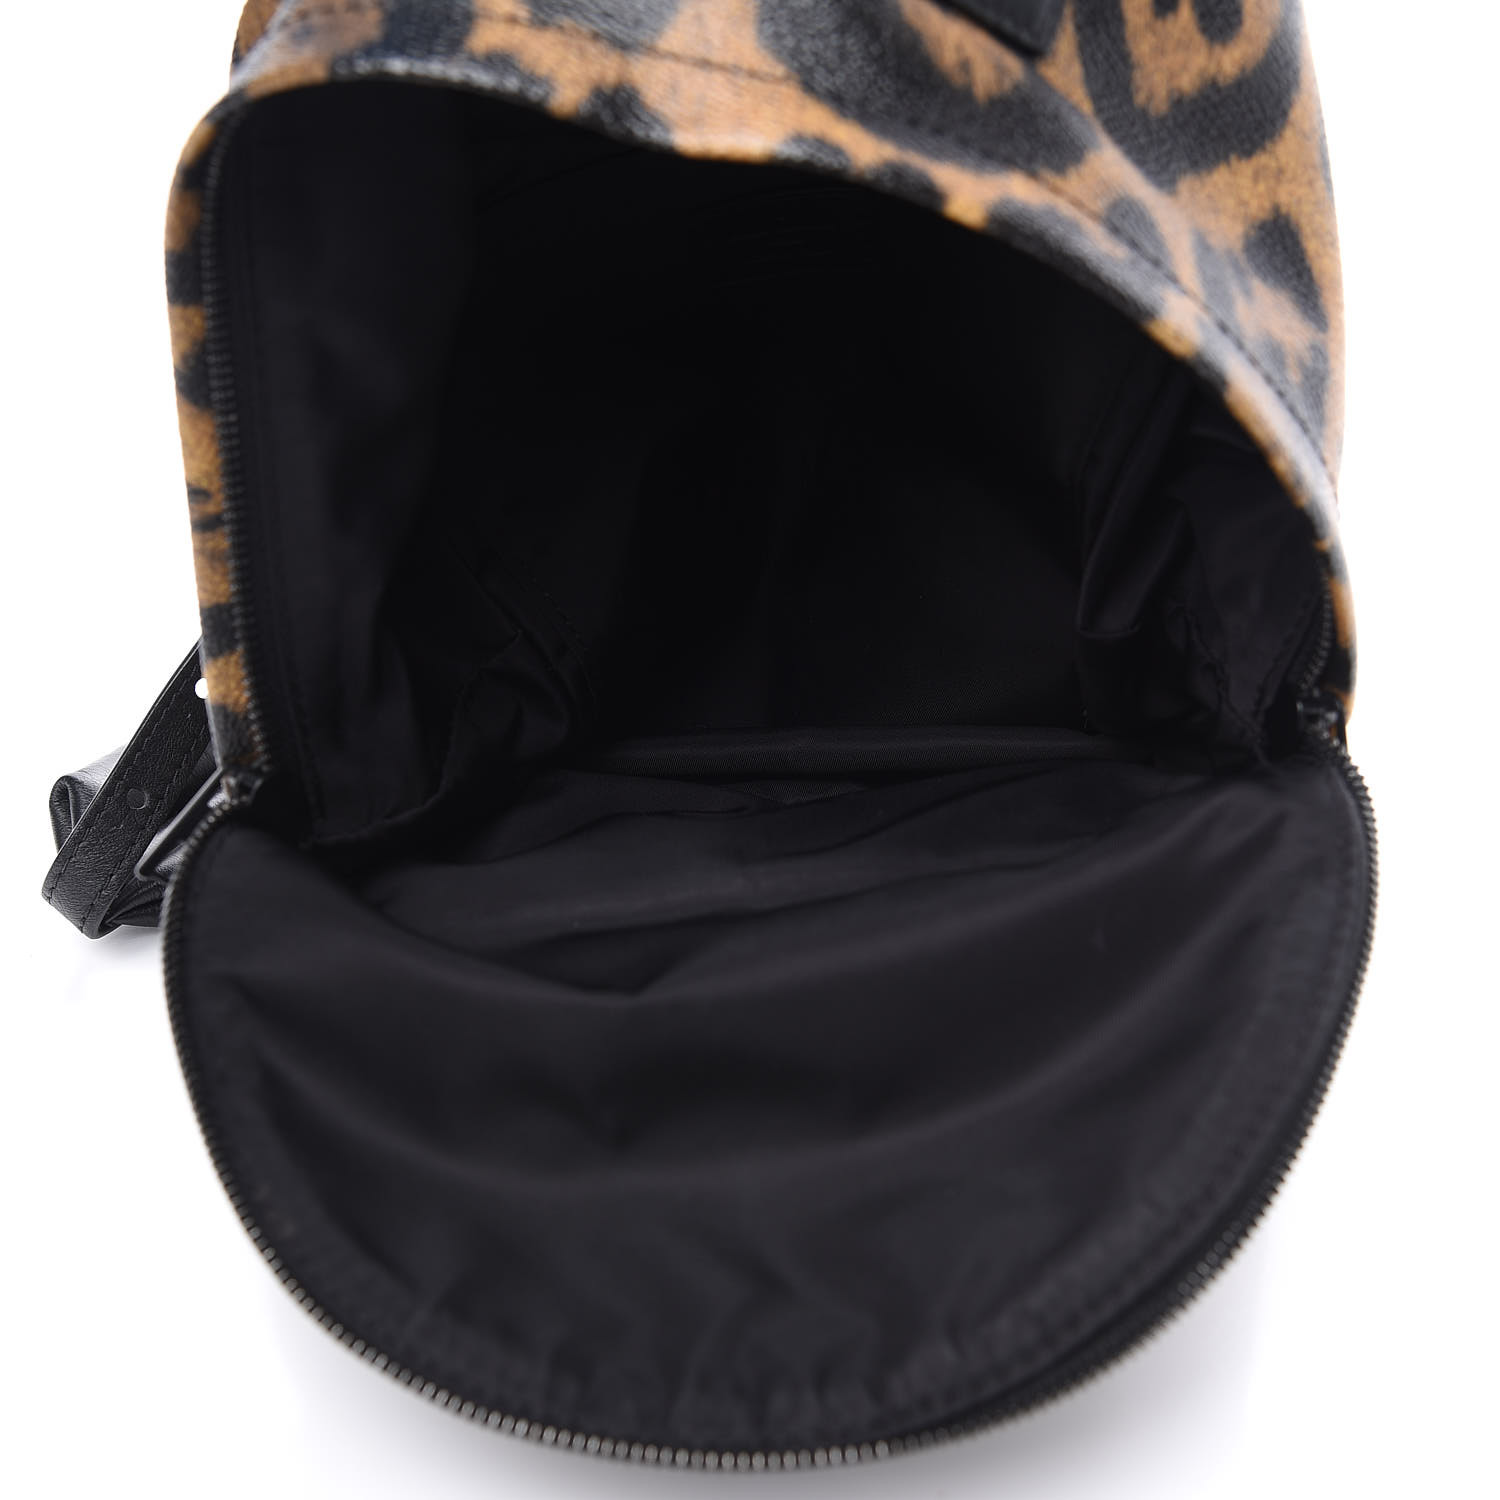 LOUIS VUITTON Wild Animal Print Palm Springs Backpack PM 561415